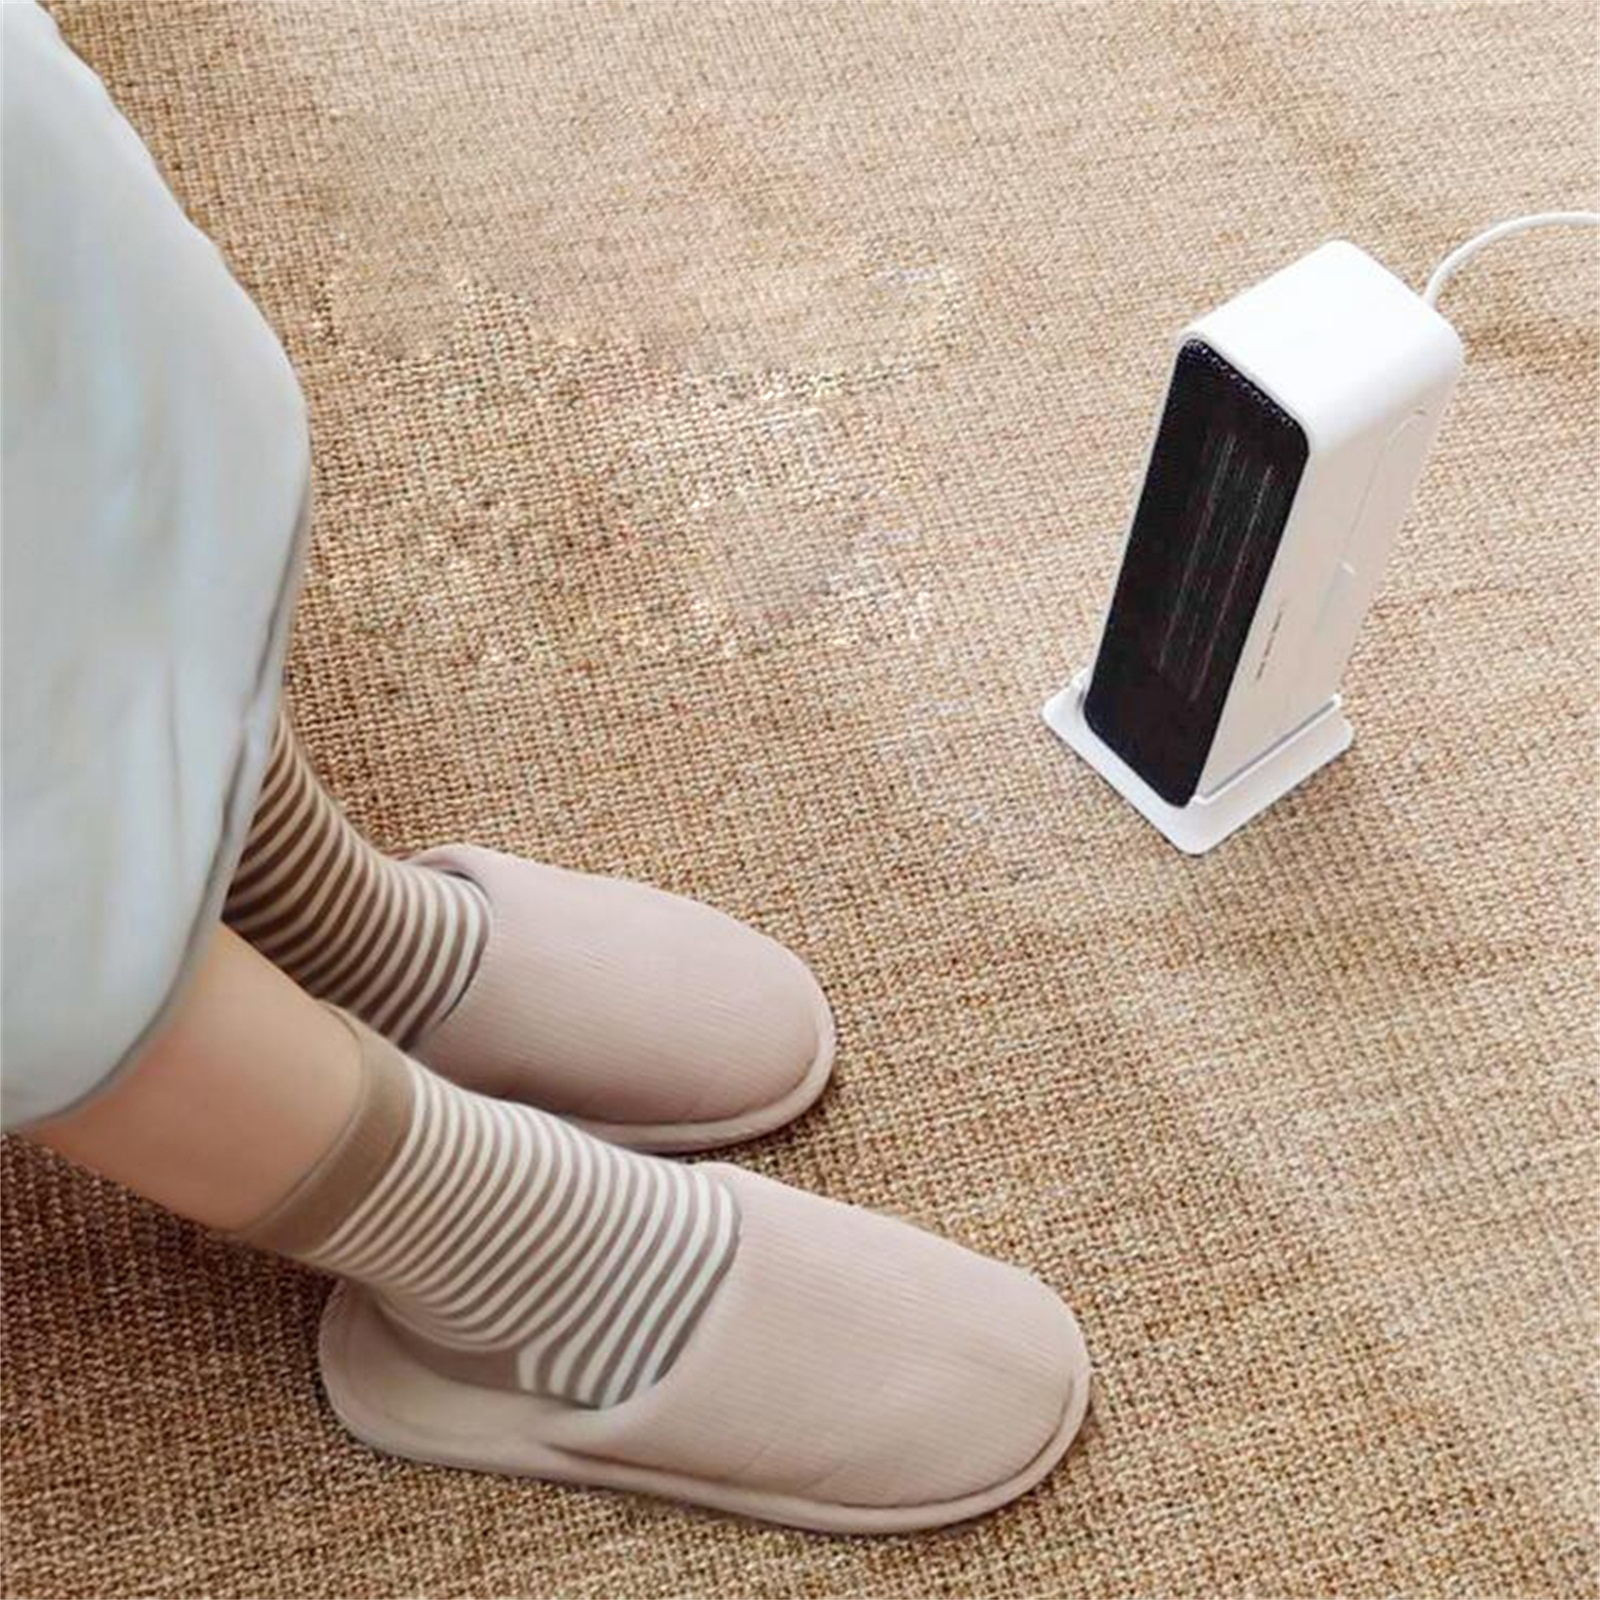 Electric Wall Heater Mini Portable Plug-in Personal Space Warmer for Indoor Heating Camping Any Place Adjustable Thermostat#30